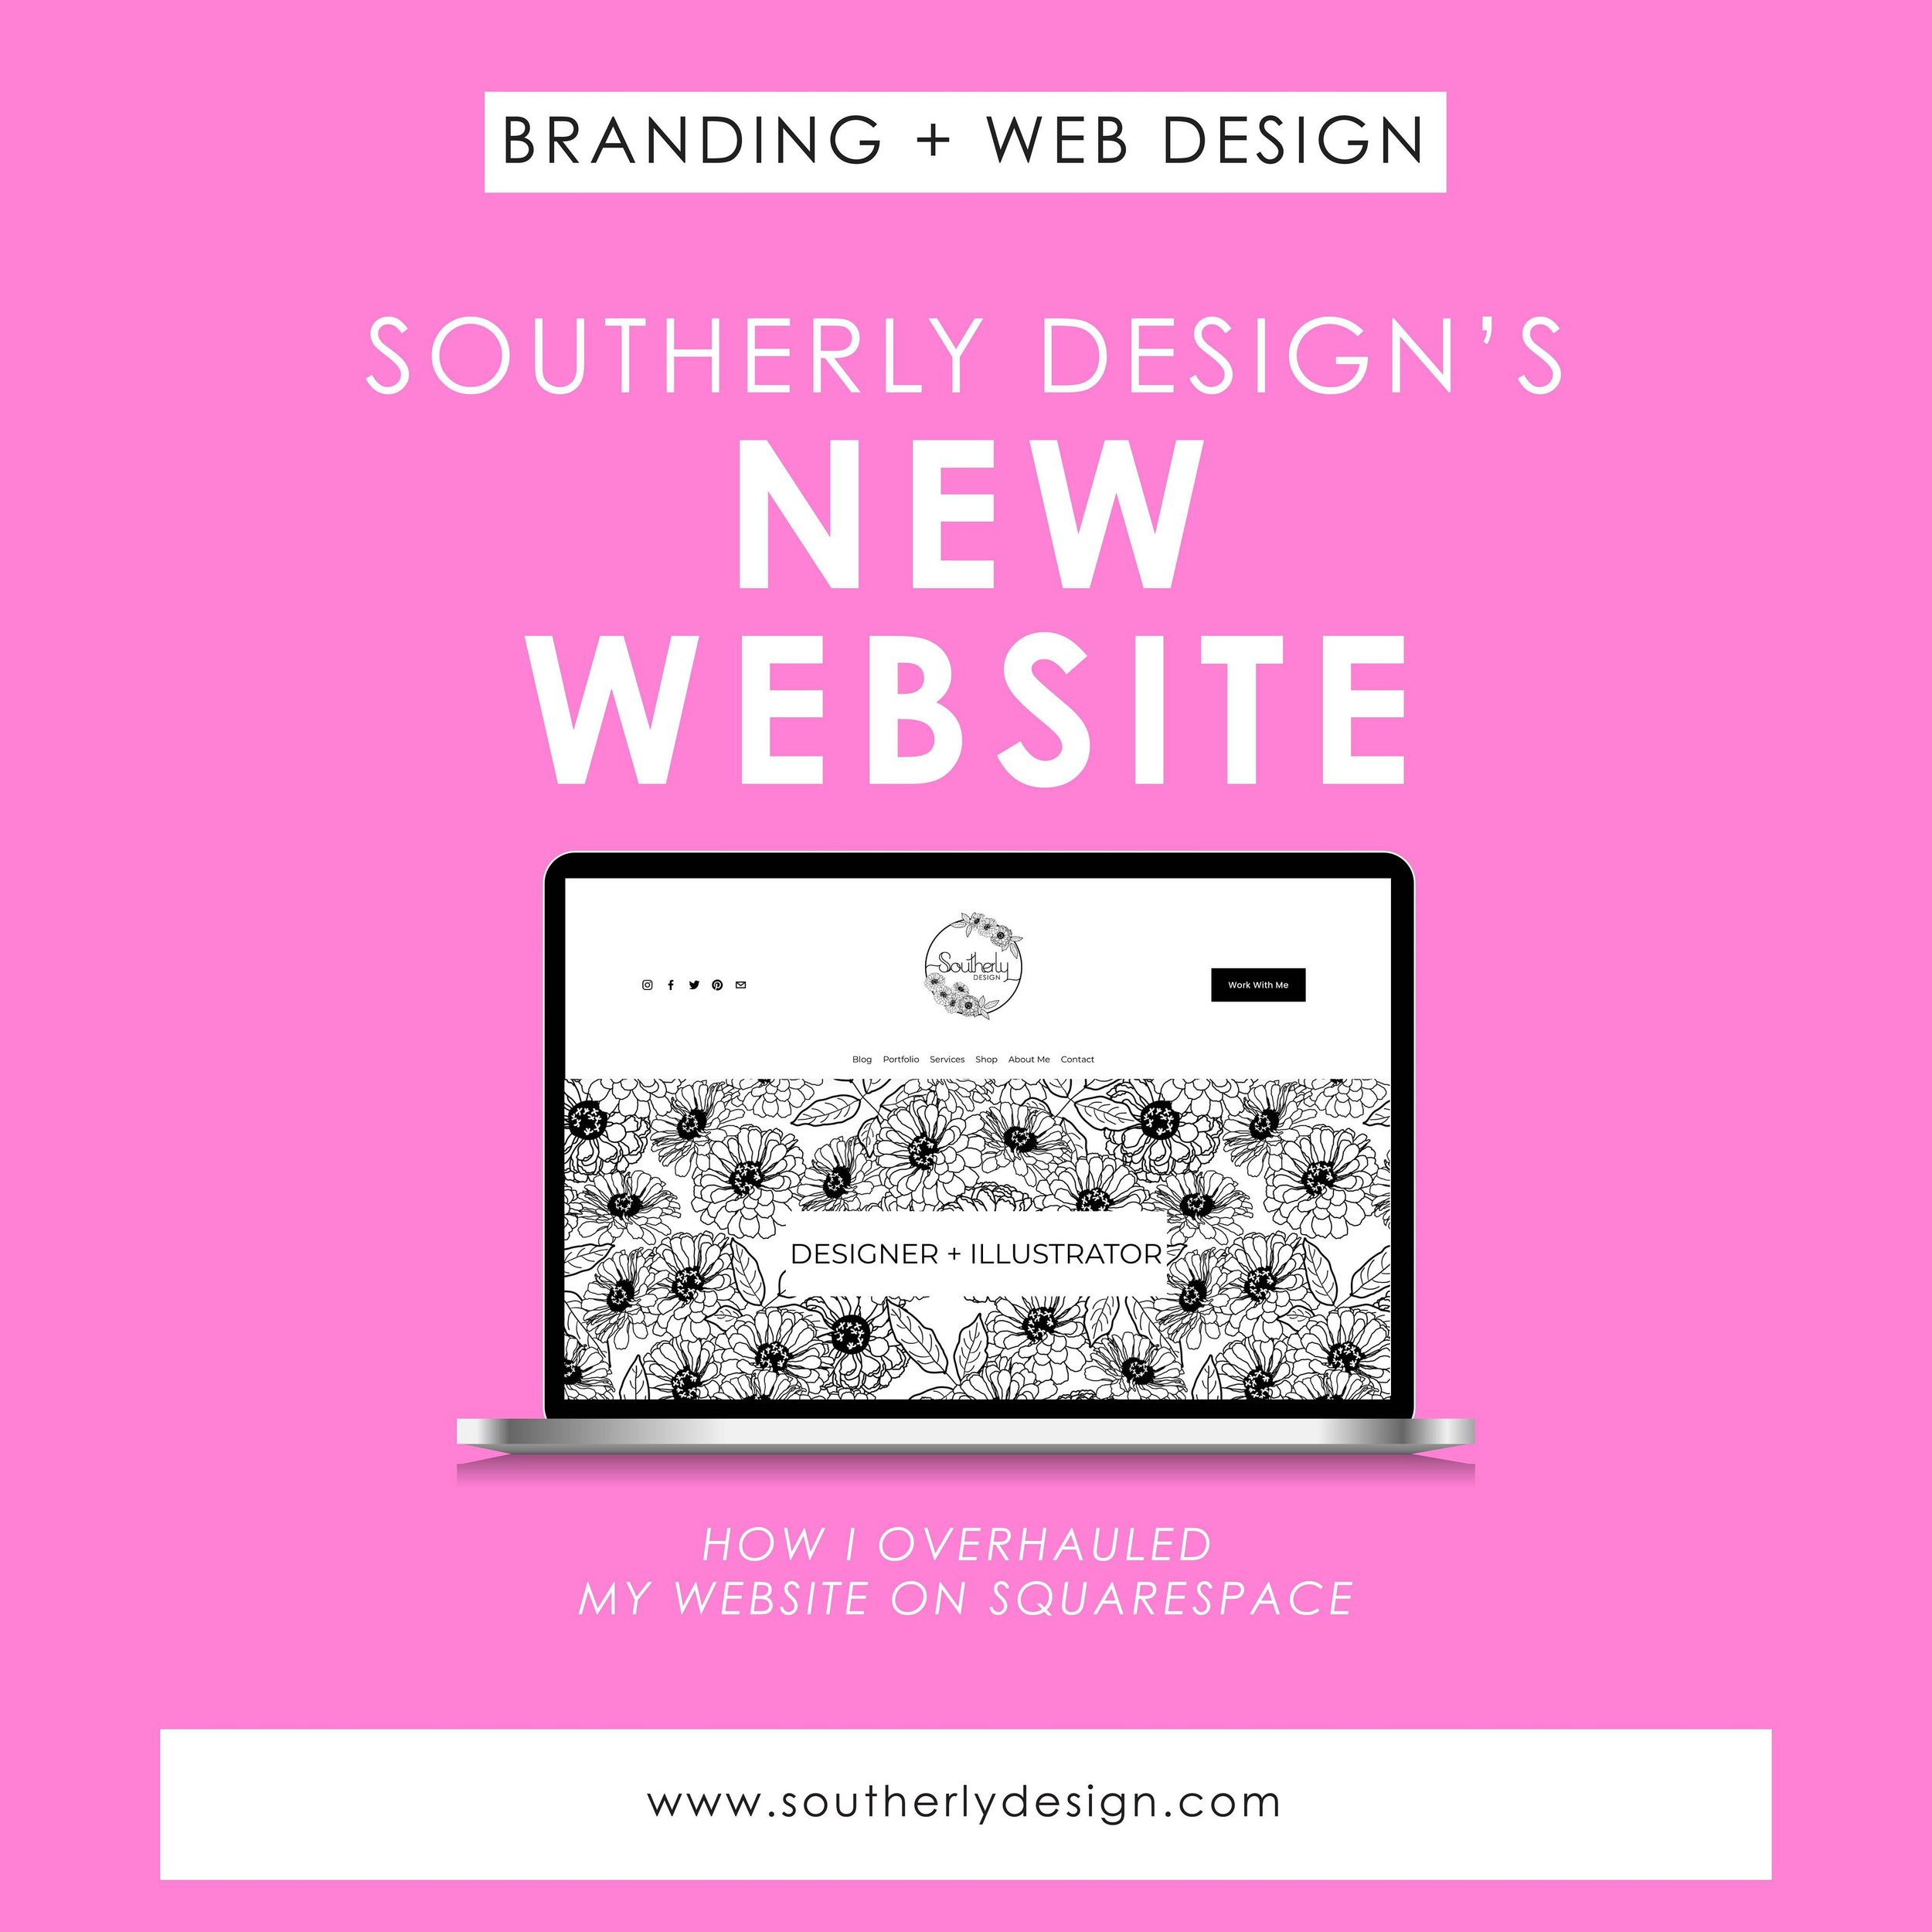 I overhauled my website and am so happy with the results! Websites are not static since they always require updates and maintenance to reflect your business needs. I use Squarespace as a platform and it is intuitive and user-friendly. I highly recomm